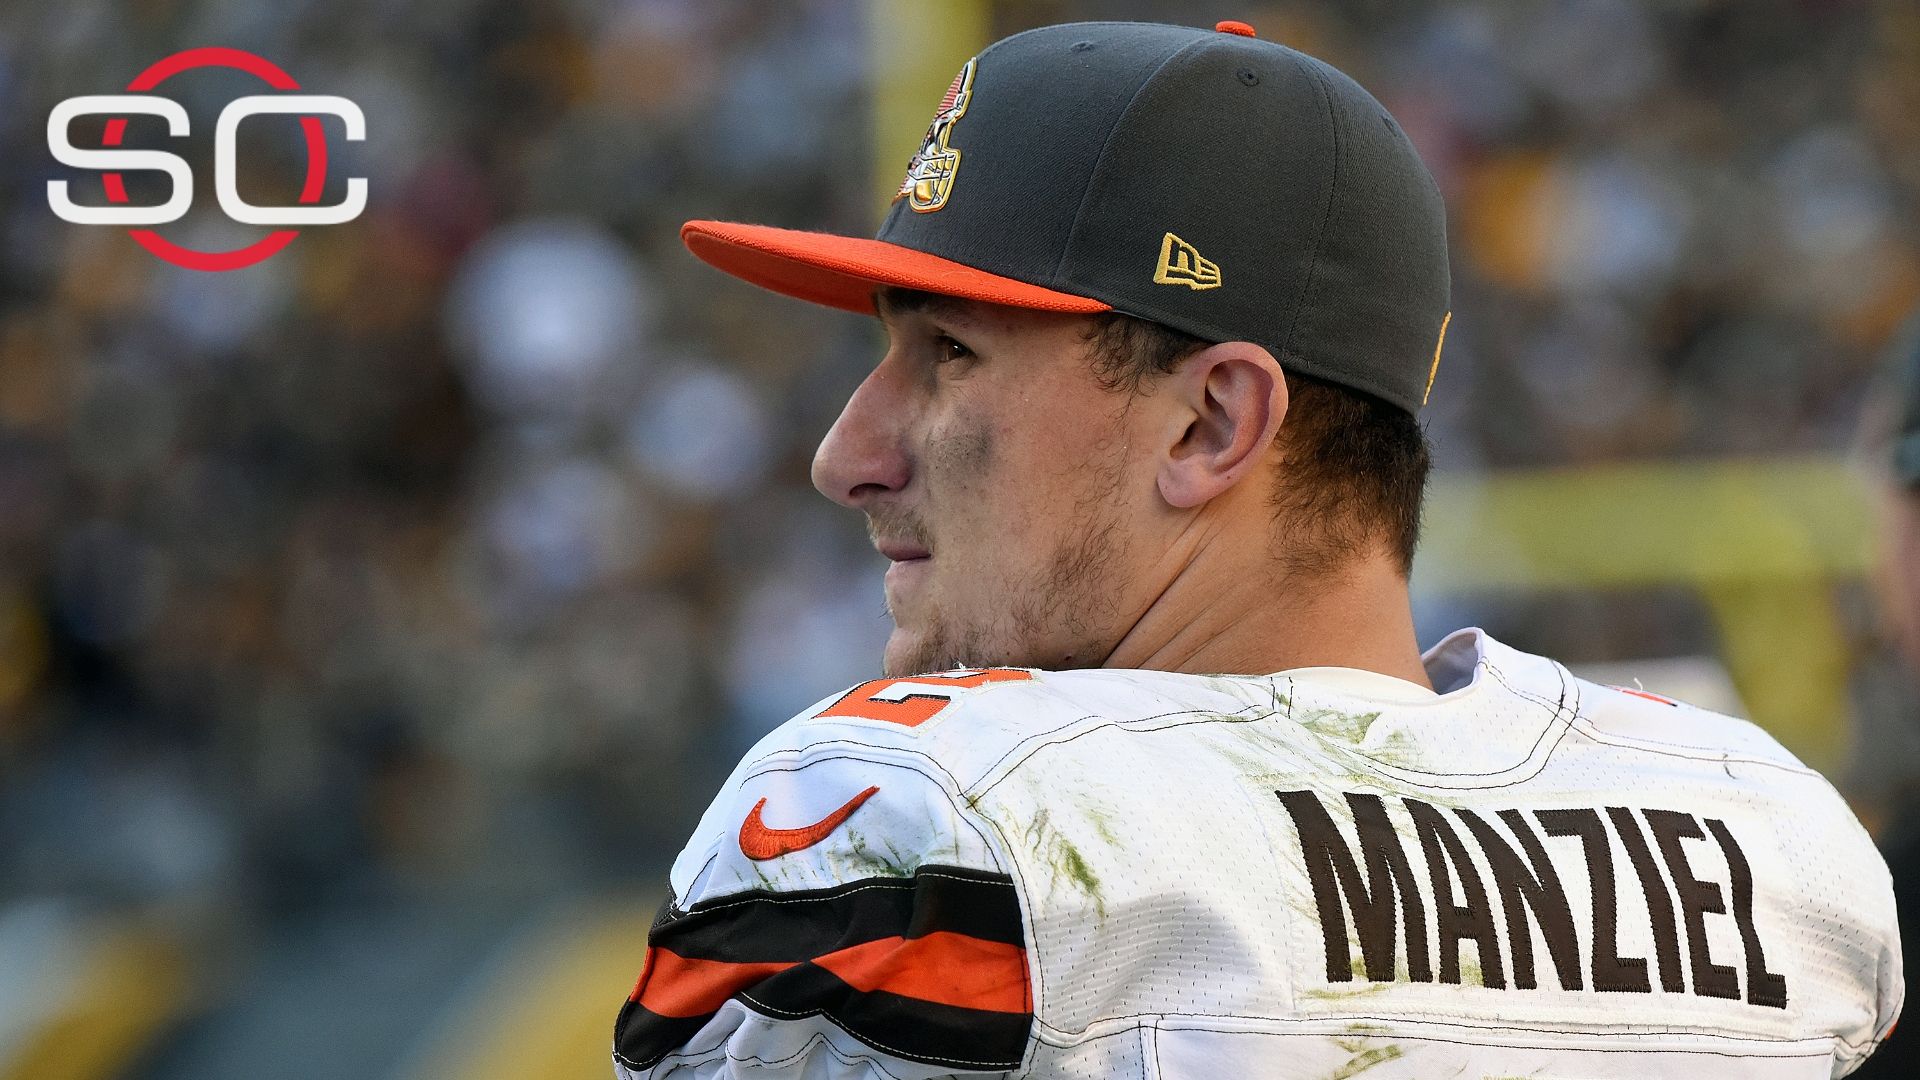 Johnny Manziel, dropped by agent, 'hoping to take care of issues